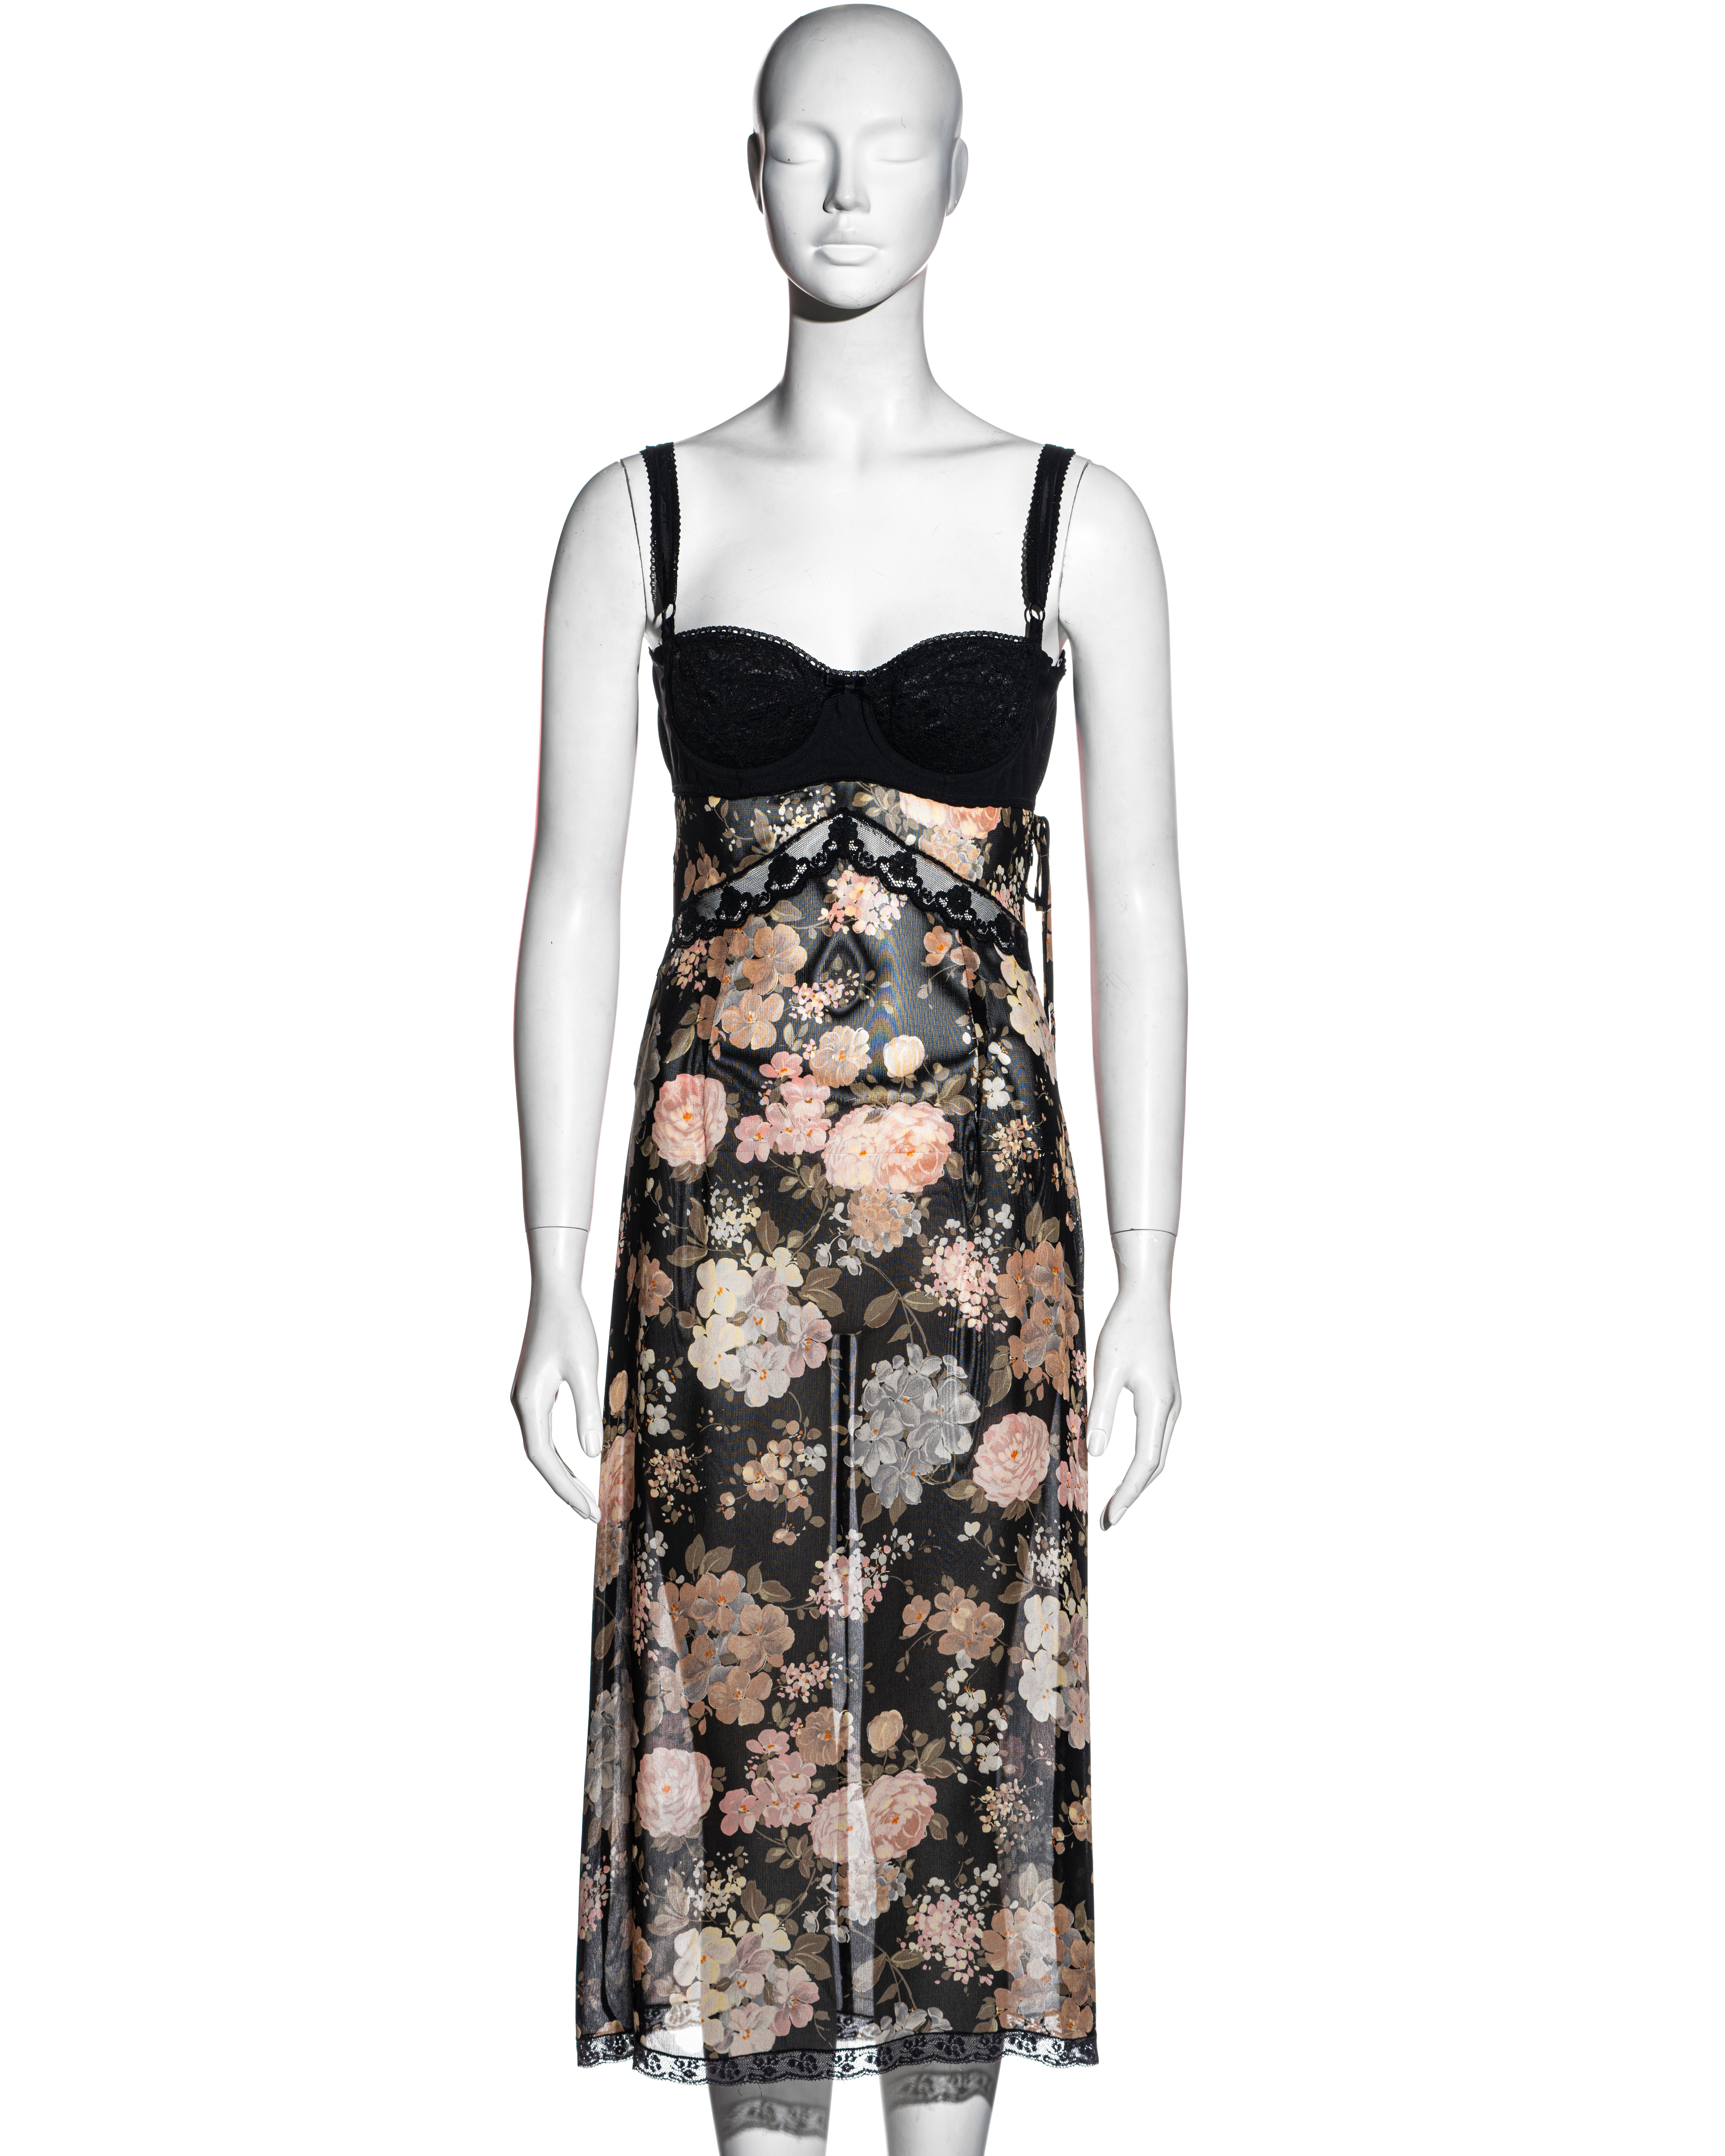 ▪ Dolce & Gabbana rayon chiffon evening slip dress
▪ Attached black bra with adjustable shoulder straps 
▪ Lace inserts and trim 
▪ Floral pattern with black base 
▪ Concealed zipper at the side seam with bow ribbon detail 
▪ IT 40 - FR 36 - UK 8
▪